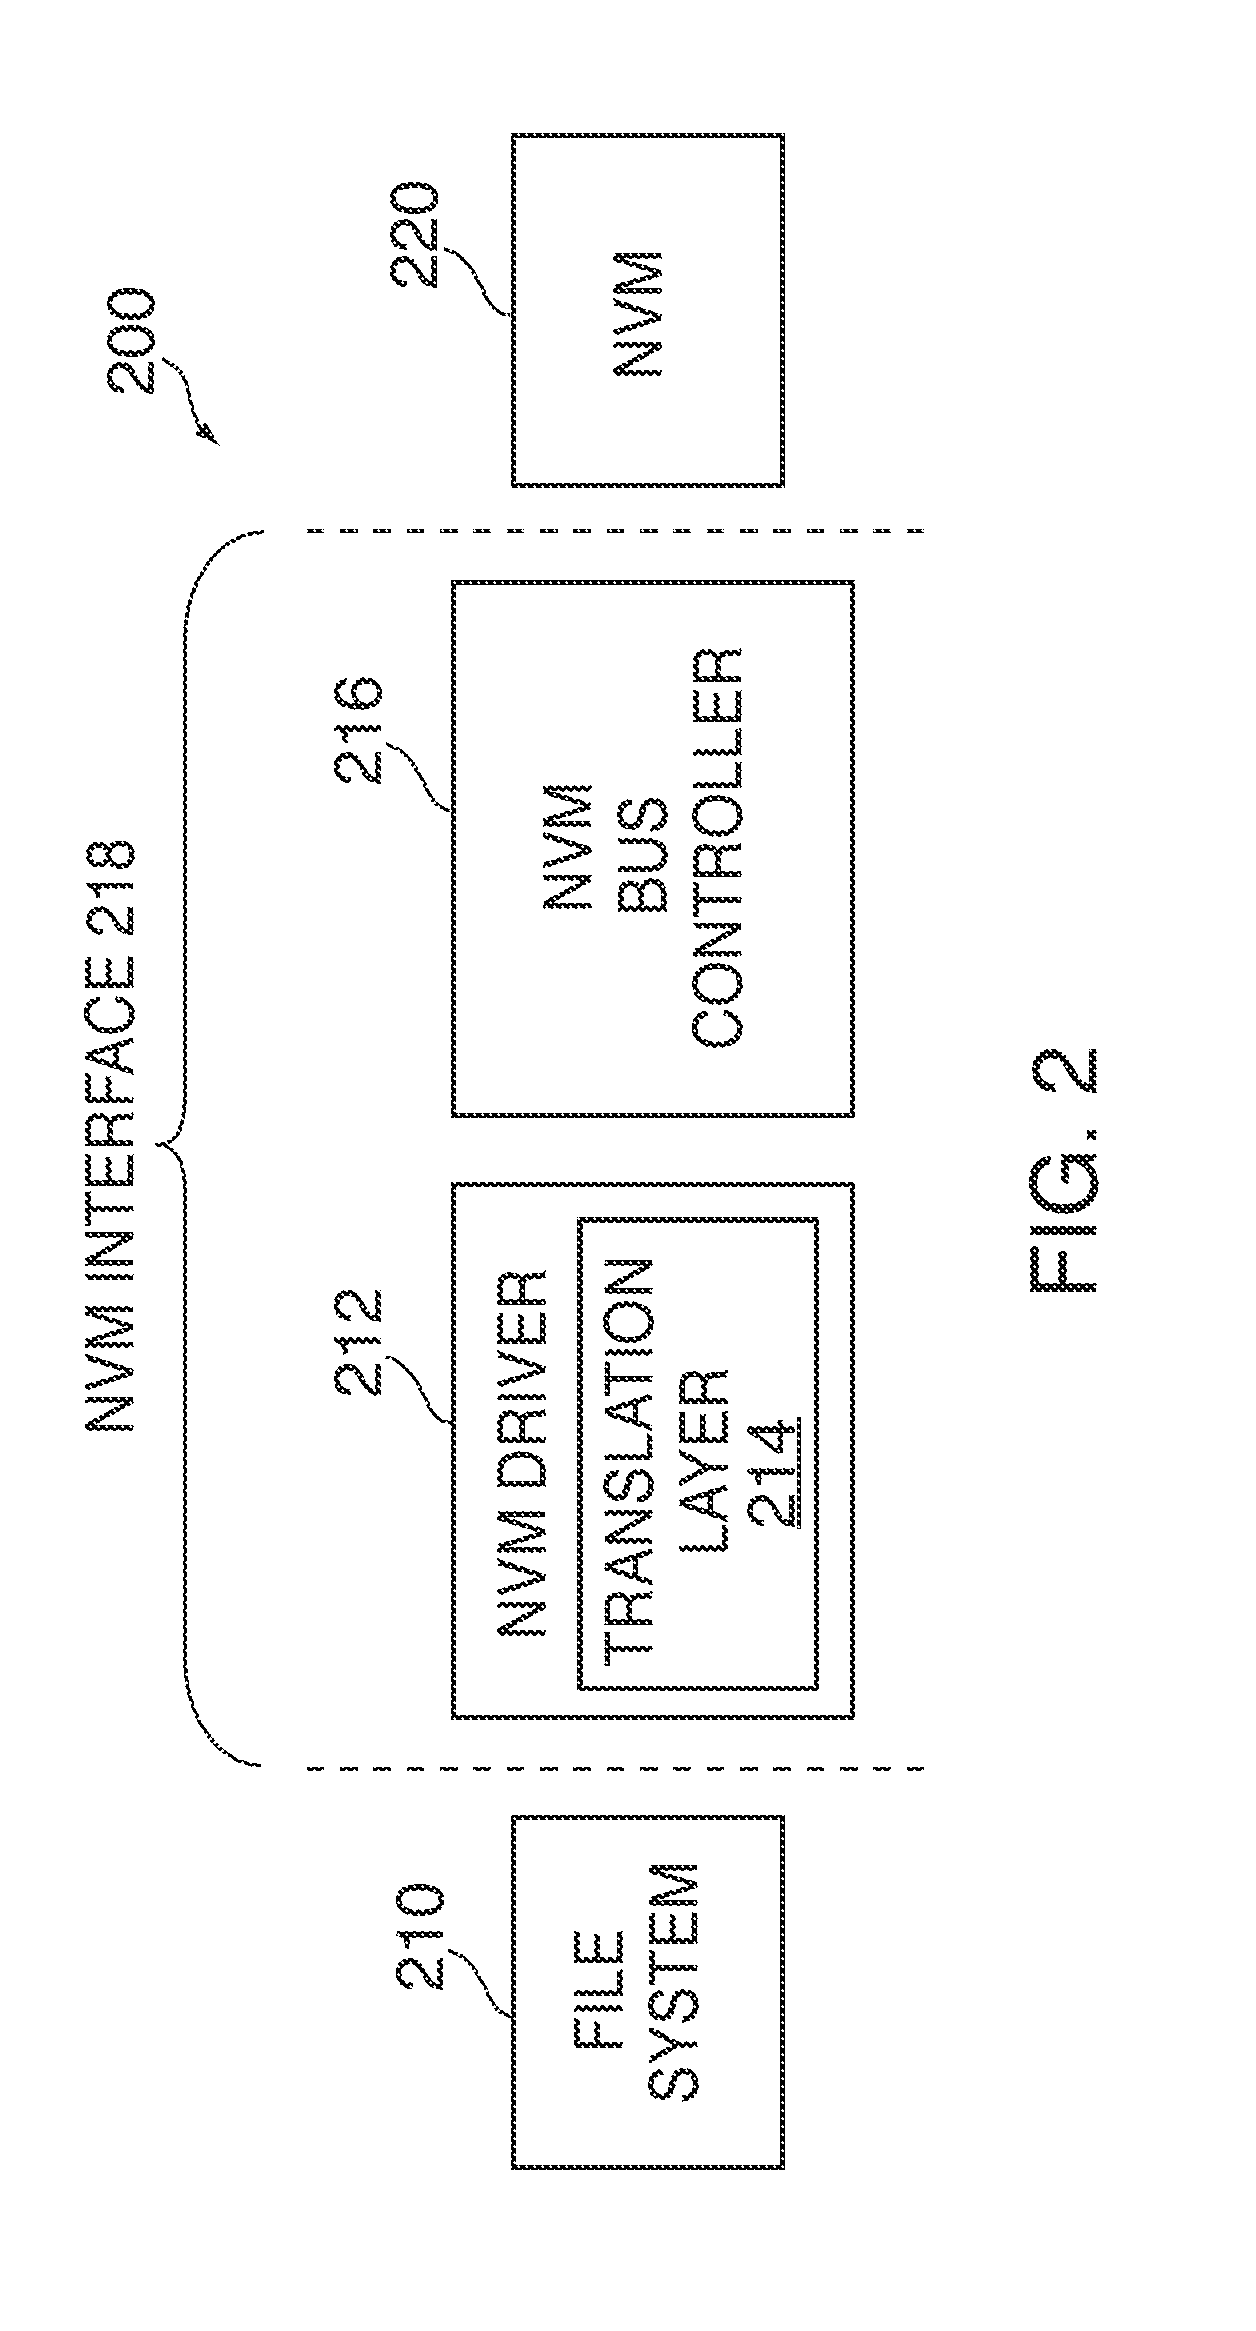 Weave sequence counter for non-volatile memory systems